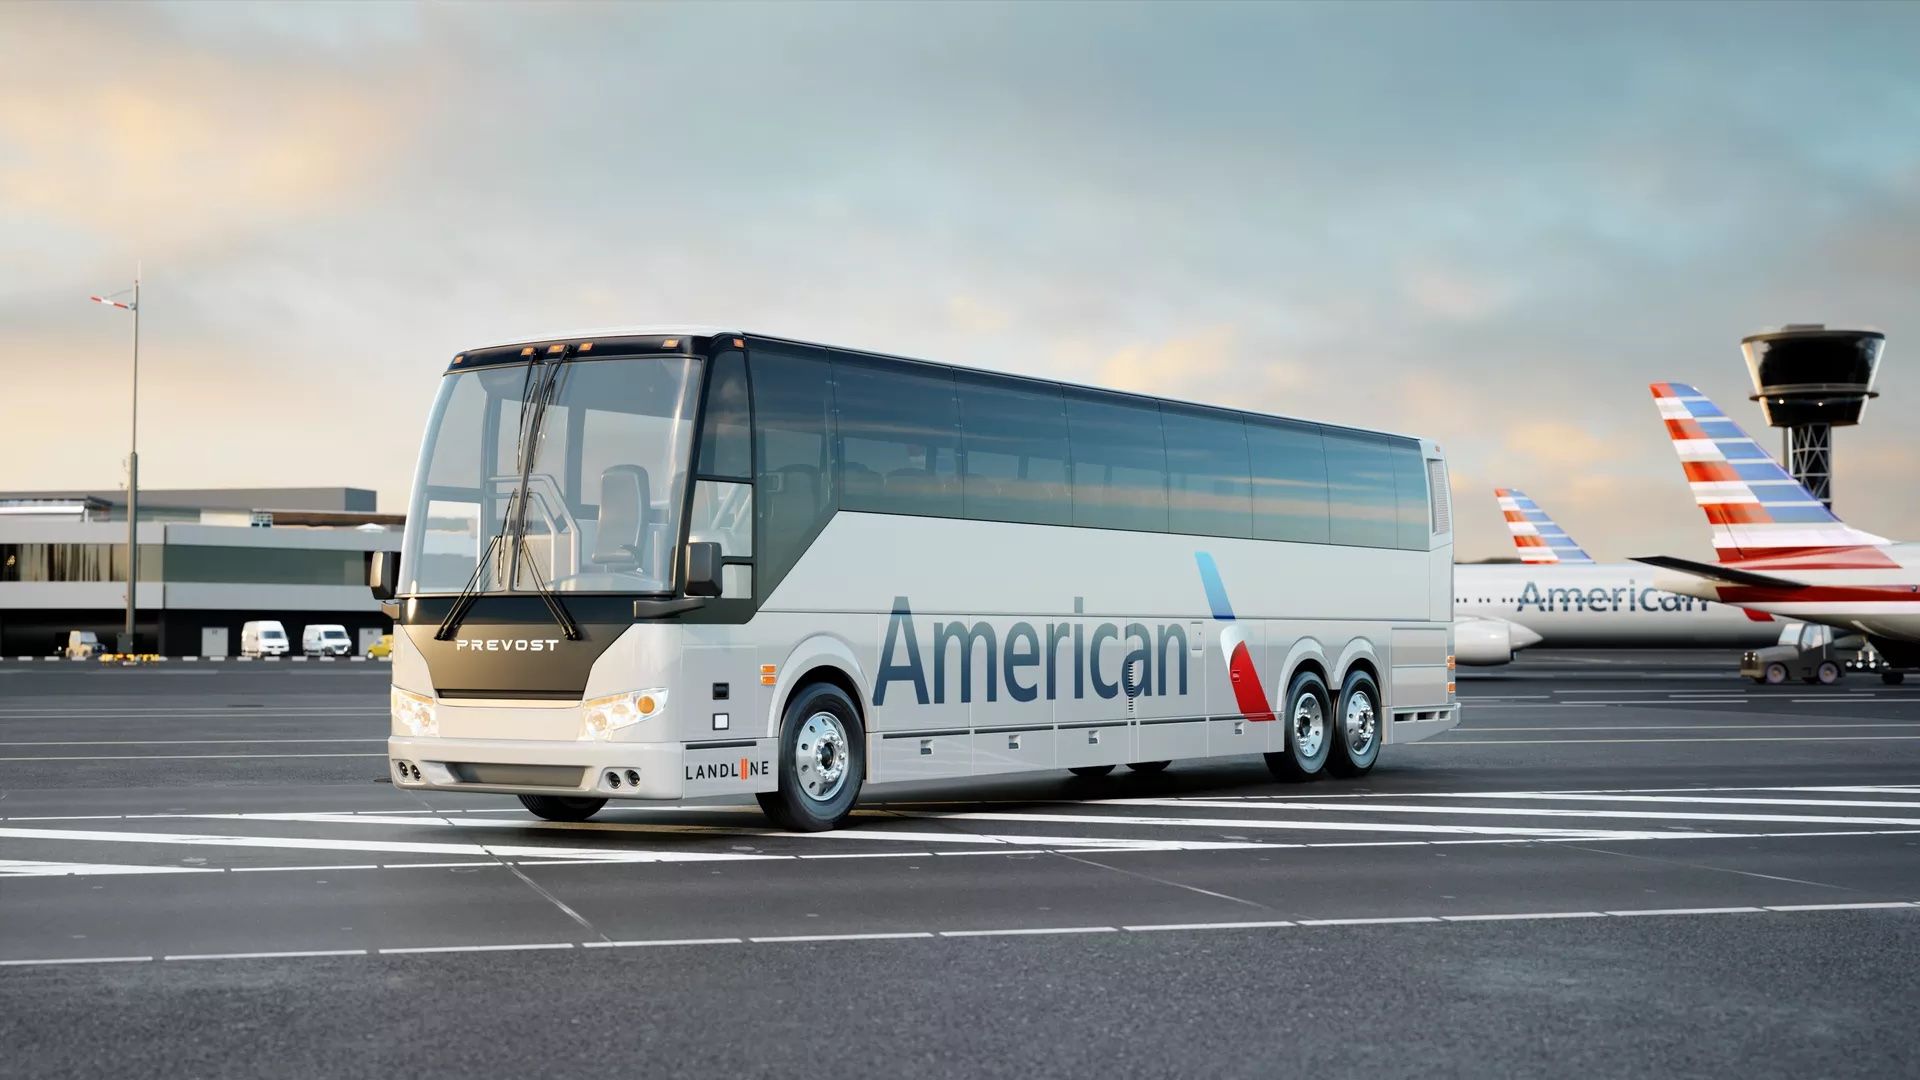 An American Airlines bus